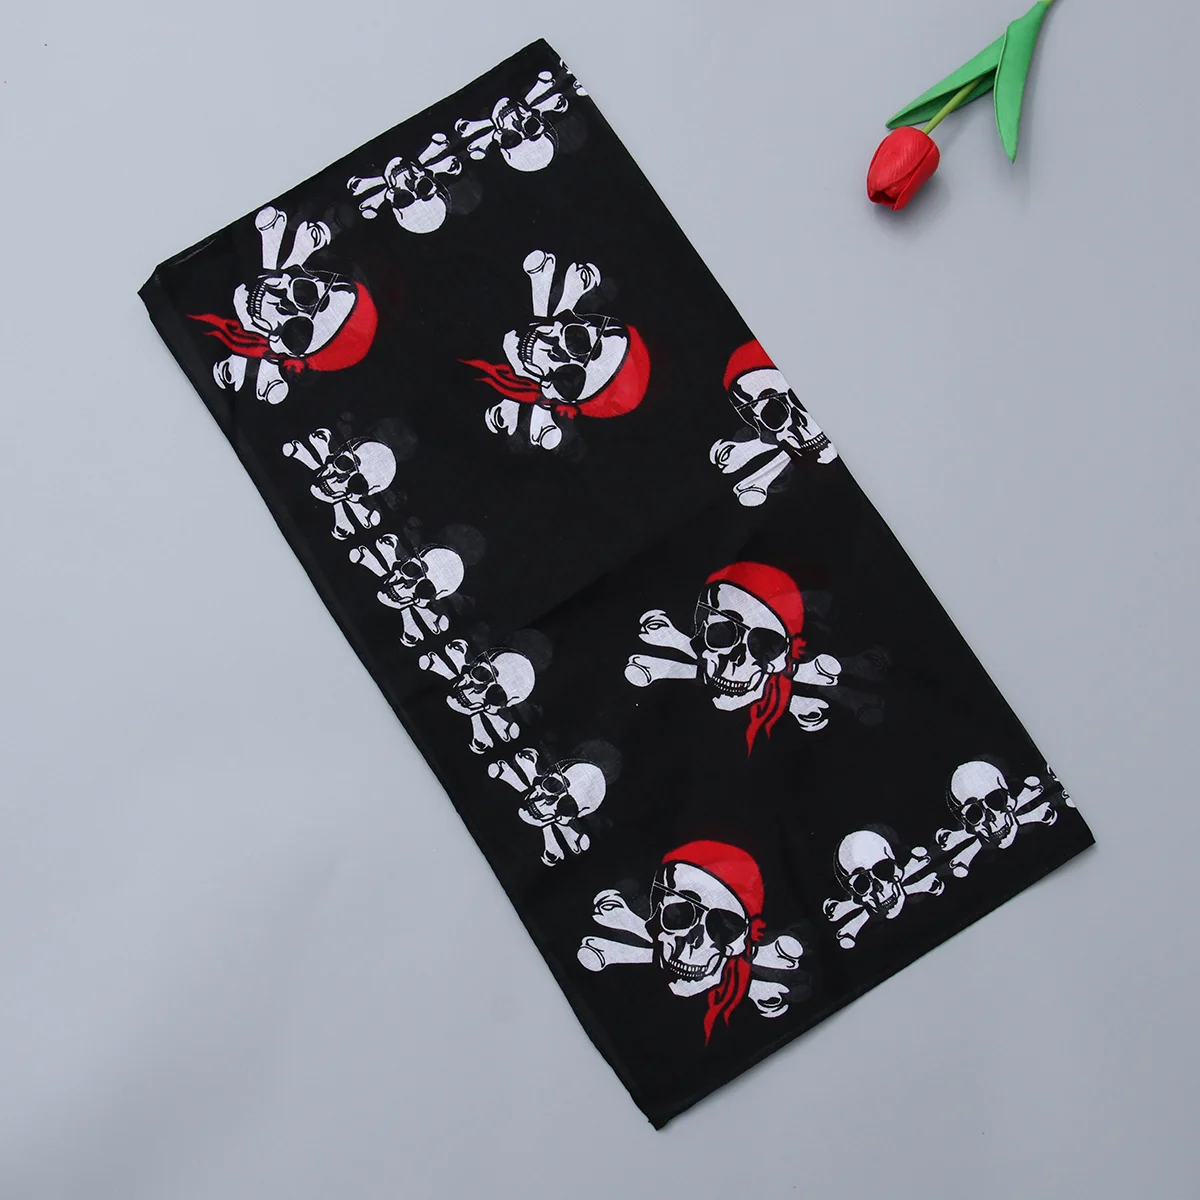 

6pcs Pirate Accessories Pirate Handkerchief Hiphop Hair Accessory for Kids Cosplay Party Decor Bandana